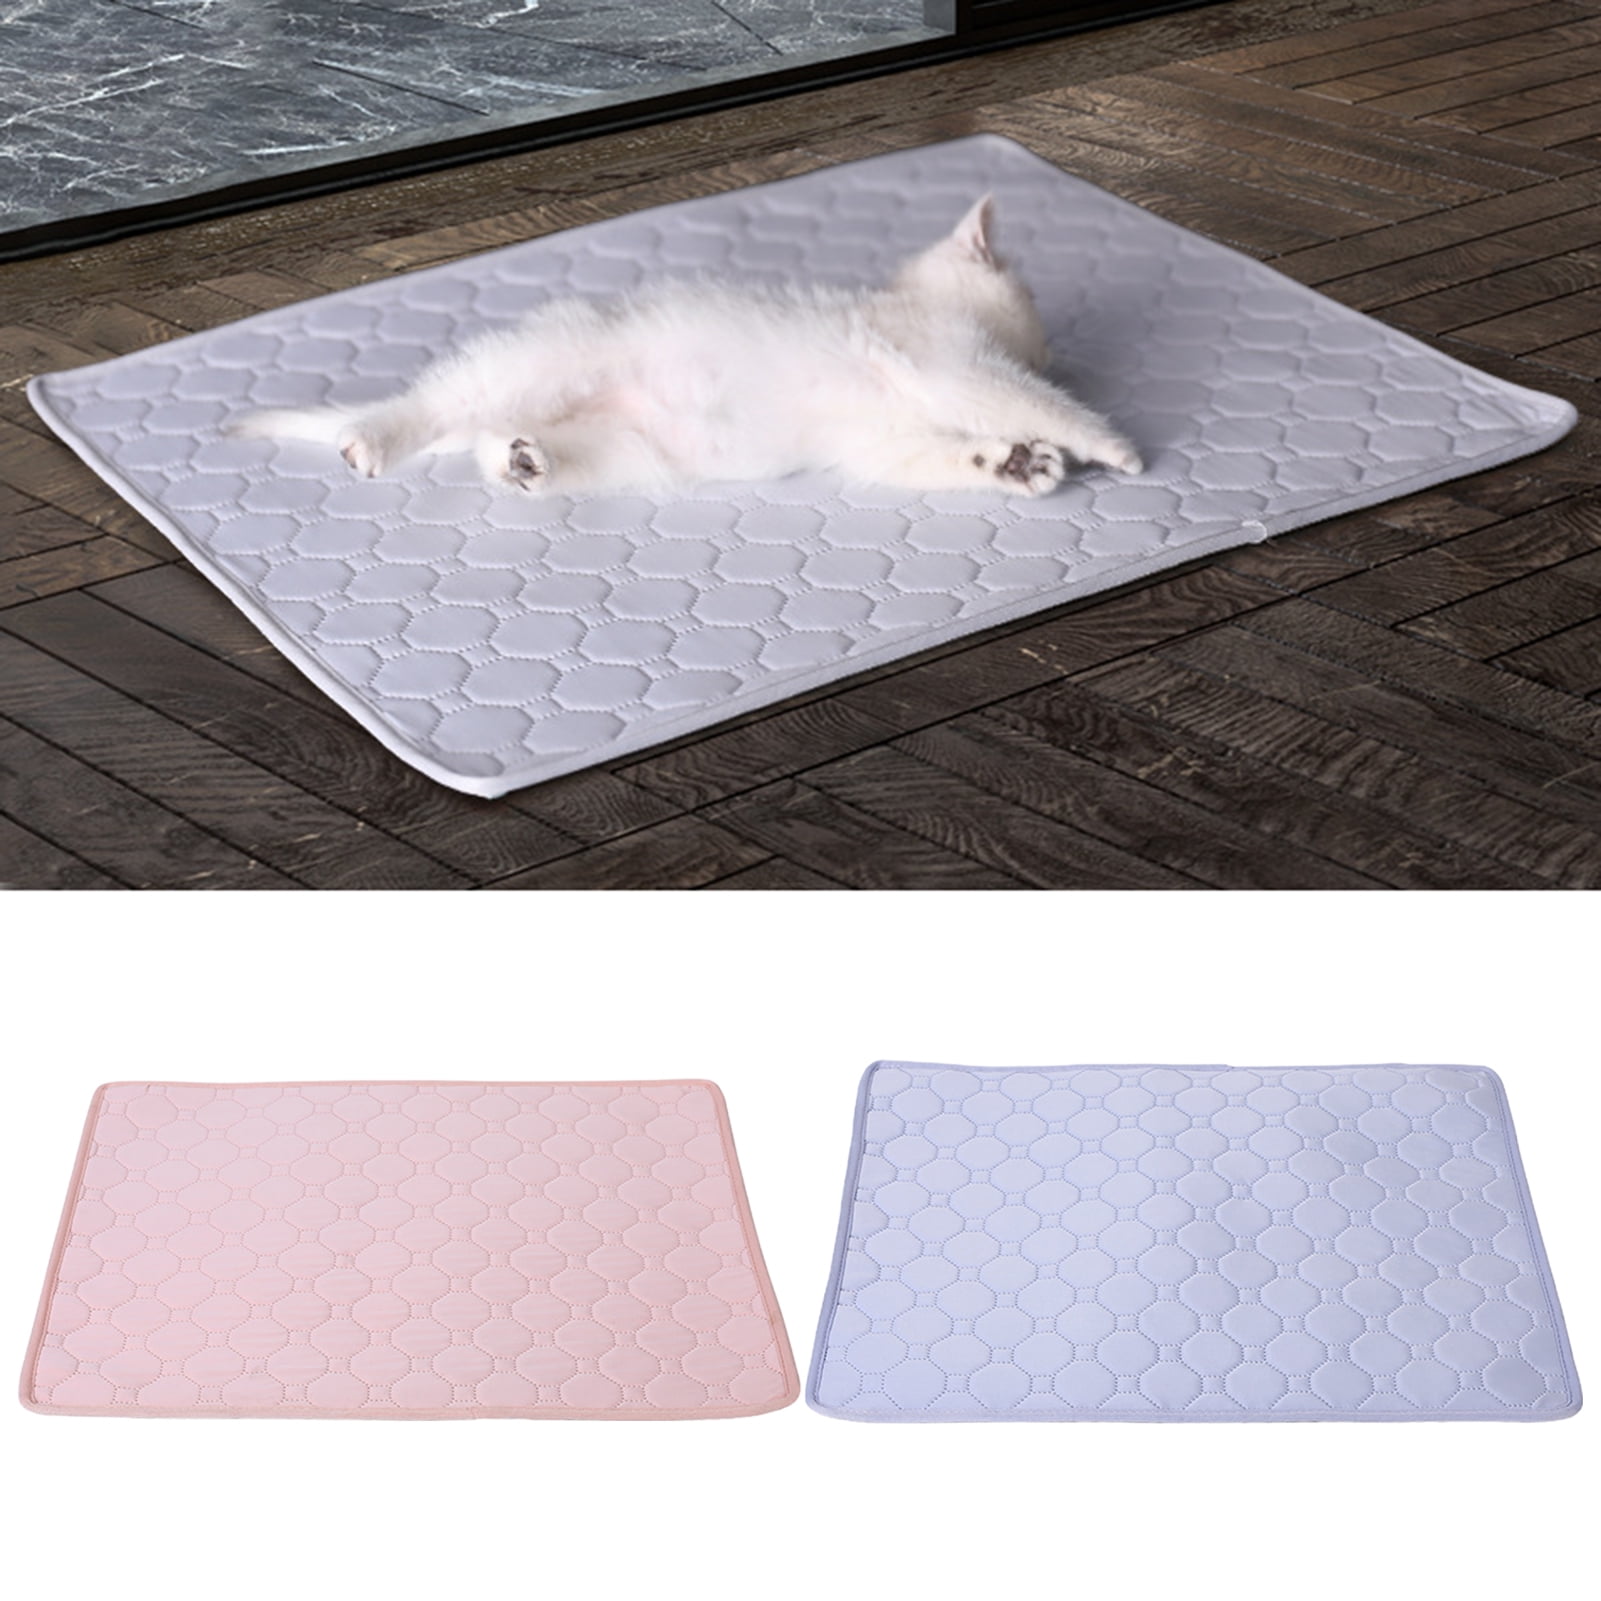 Fairnull Dog Cooling Mat Extra Large Thicken Self-Cooling Pet Pad